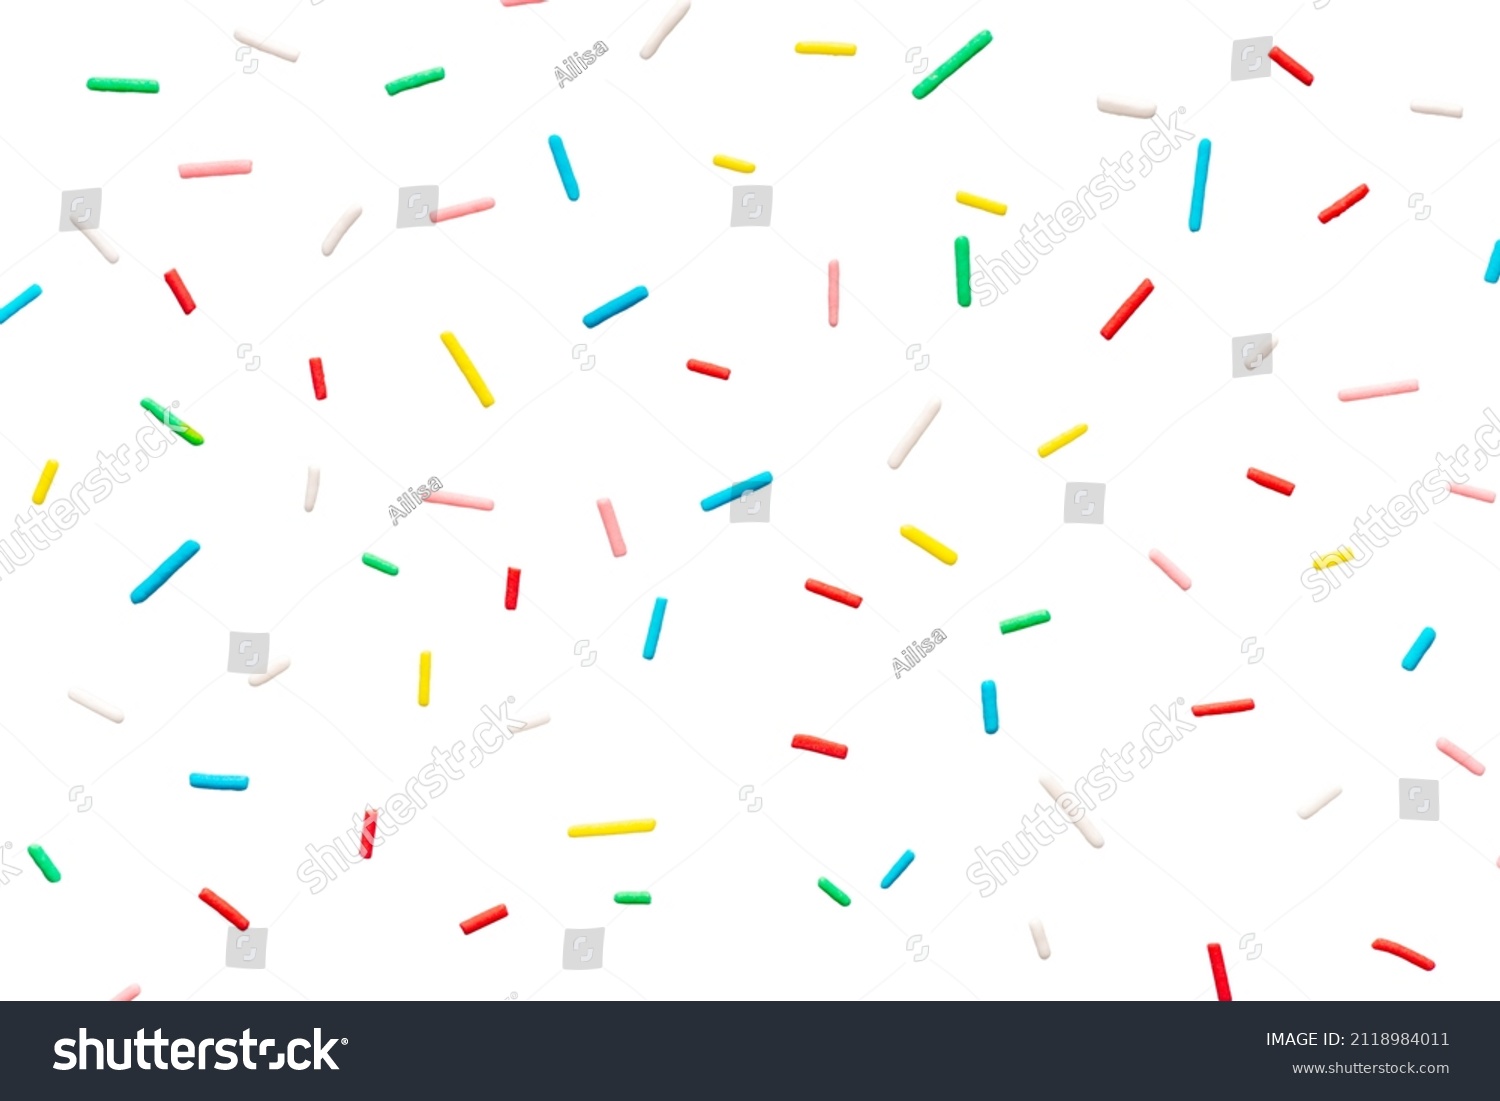 modern trendy pattern of colorful sprinkles for background of design banner, poster, flyer, card, postcard, cover, brochure isolated on white background #2118984011